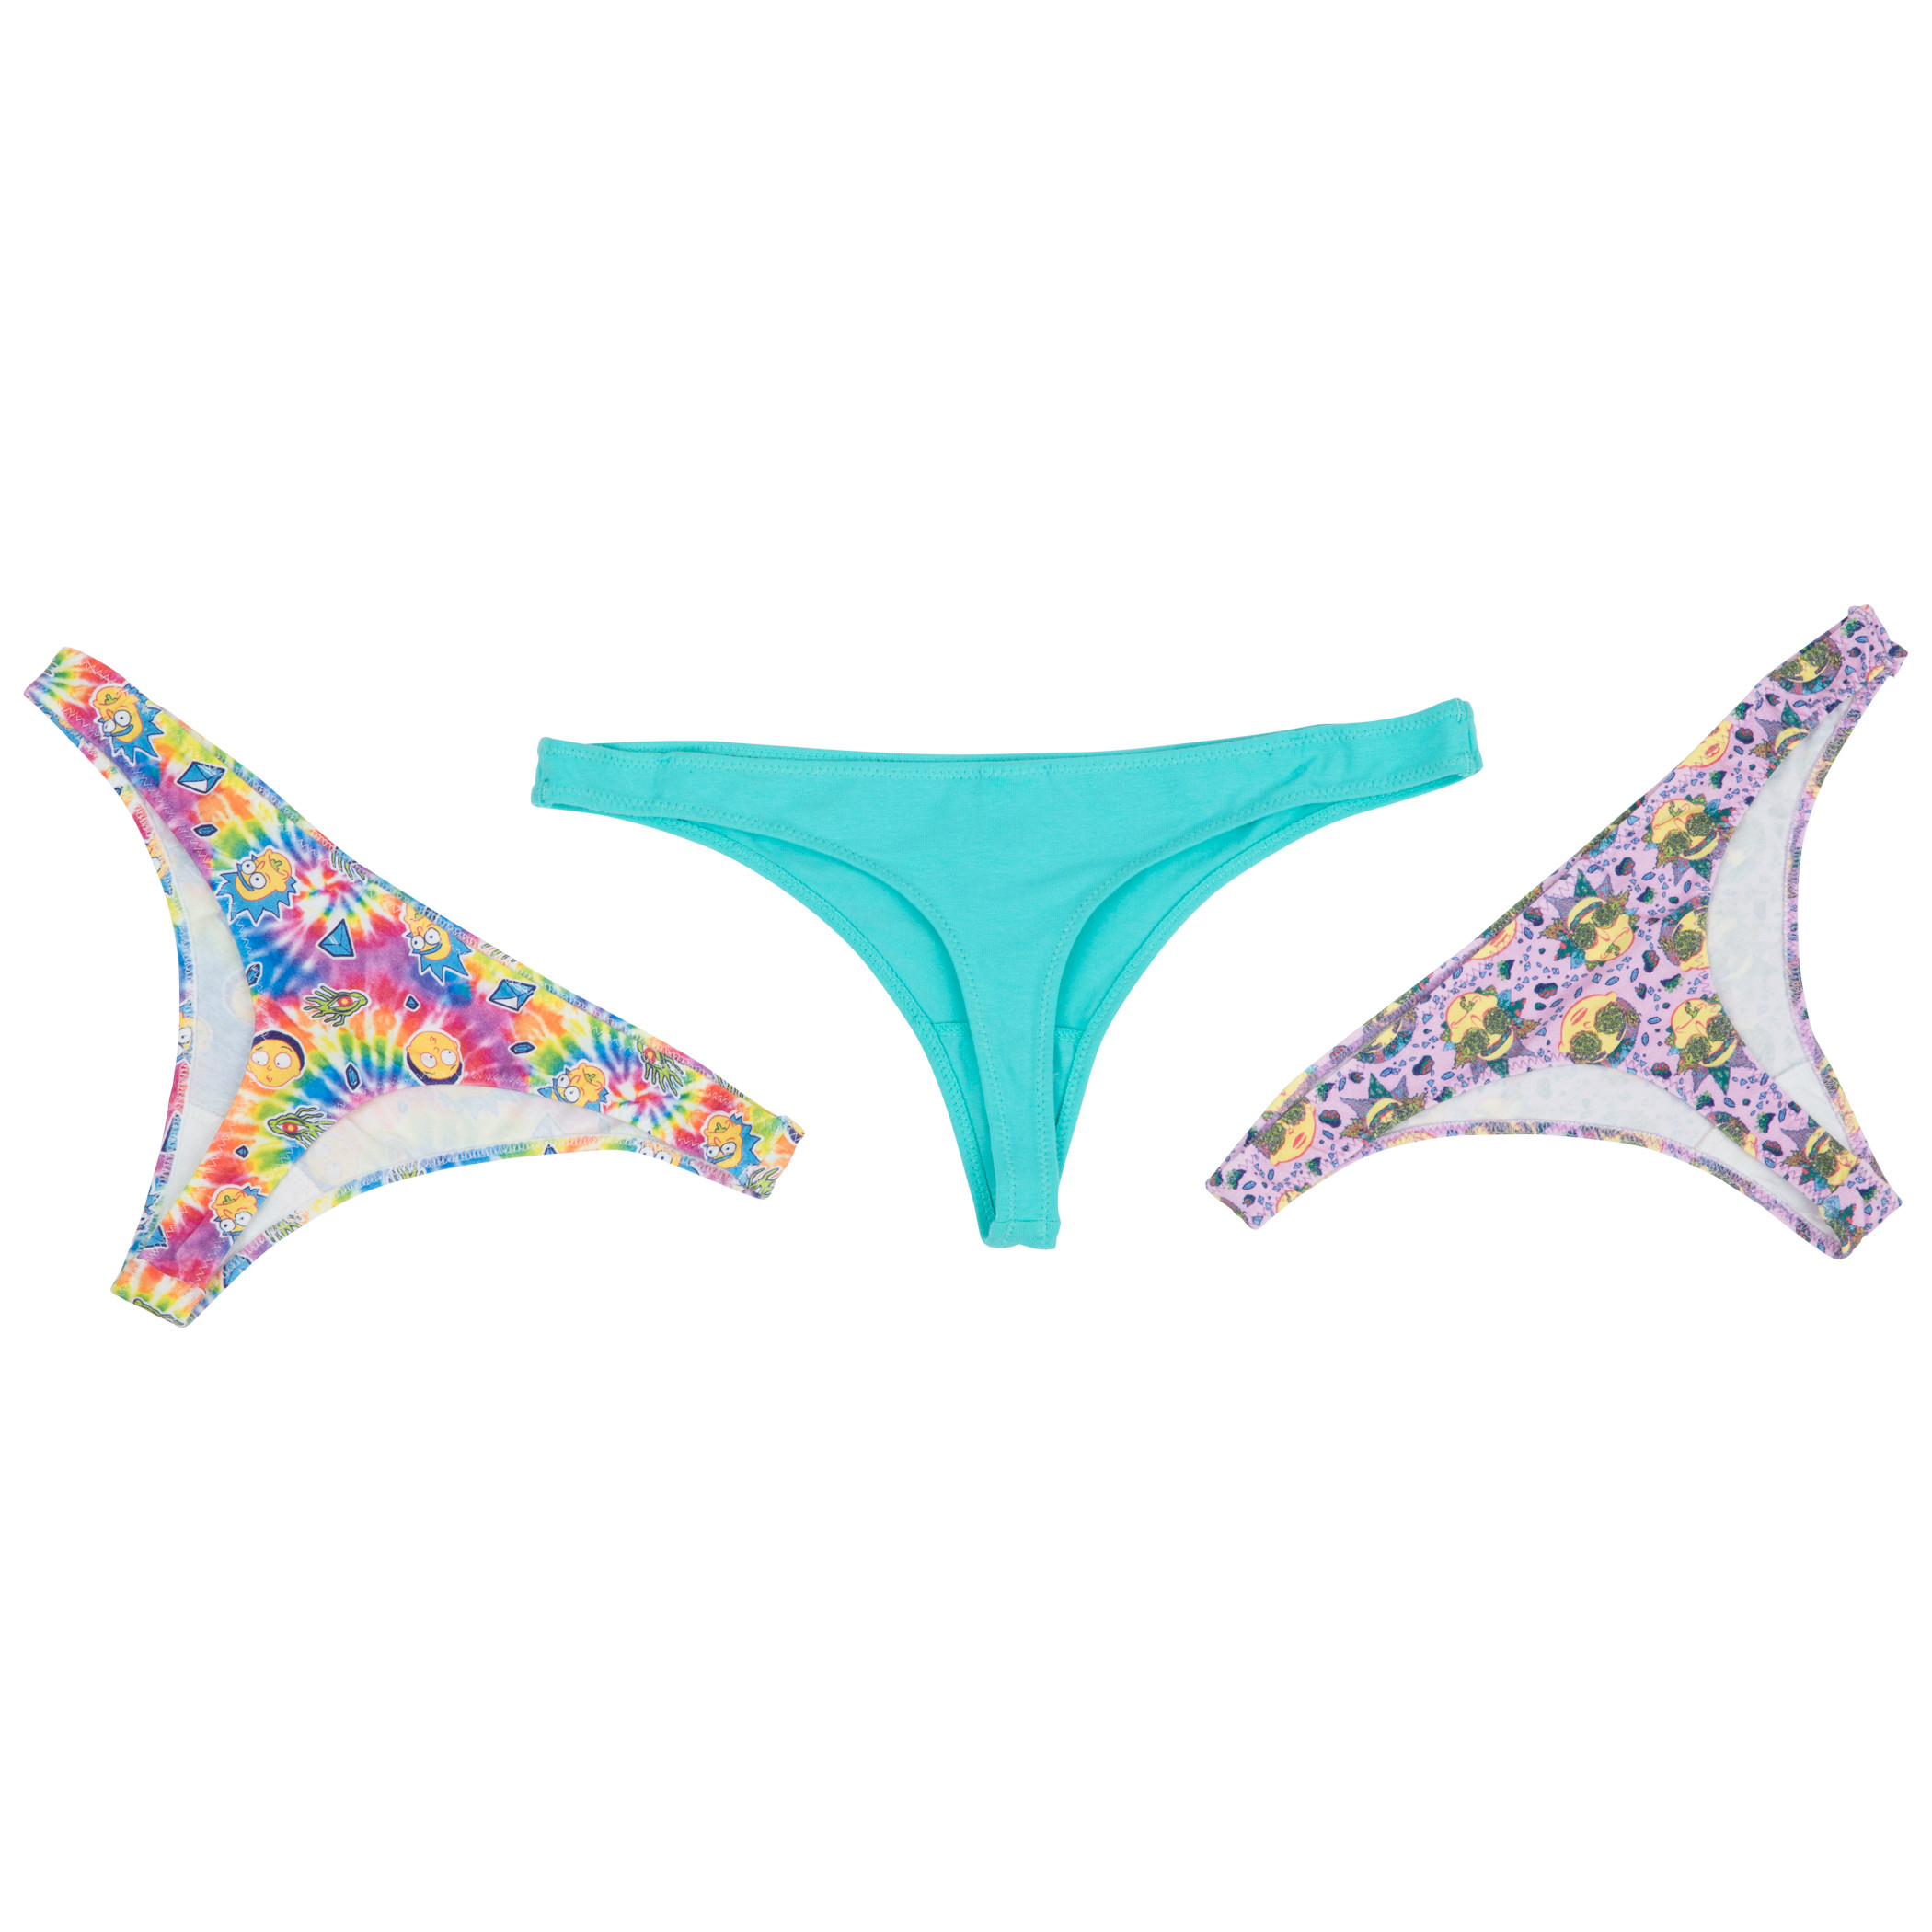 Rick and Morty Trippy 3-Pack Thong Set